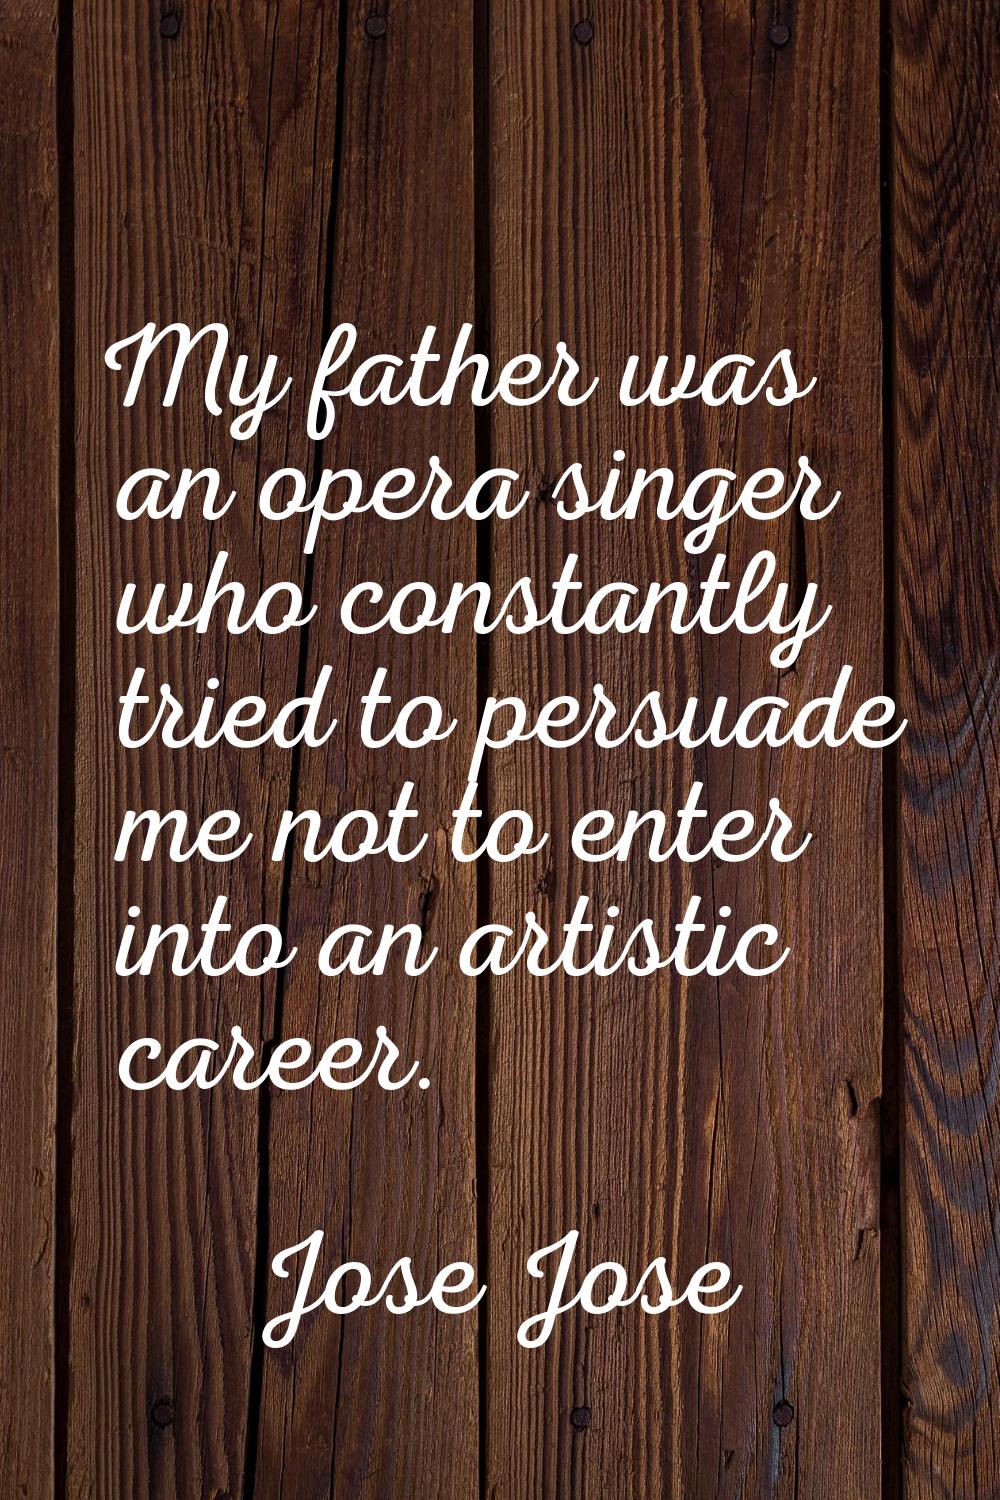 My father was an opera singer who constantly tried to persuade me not to enter into an artistic car